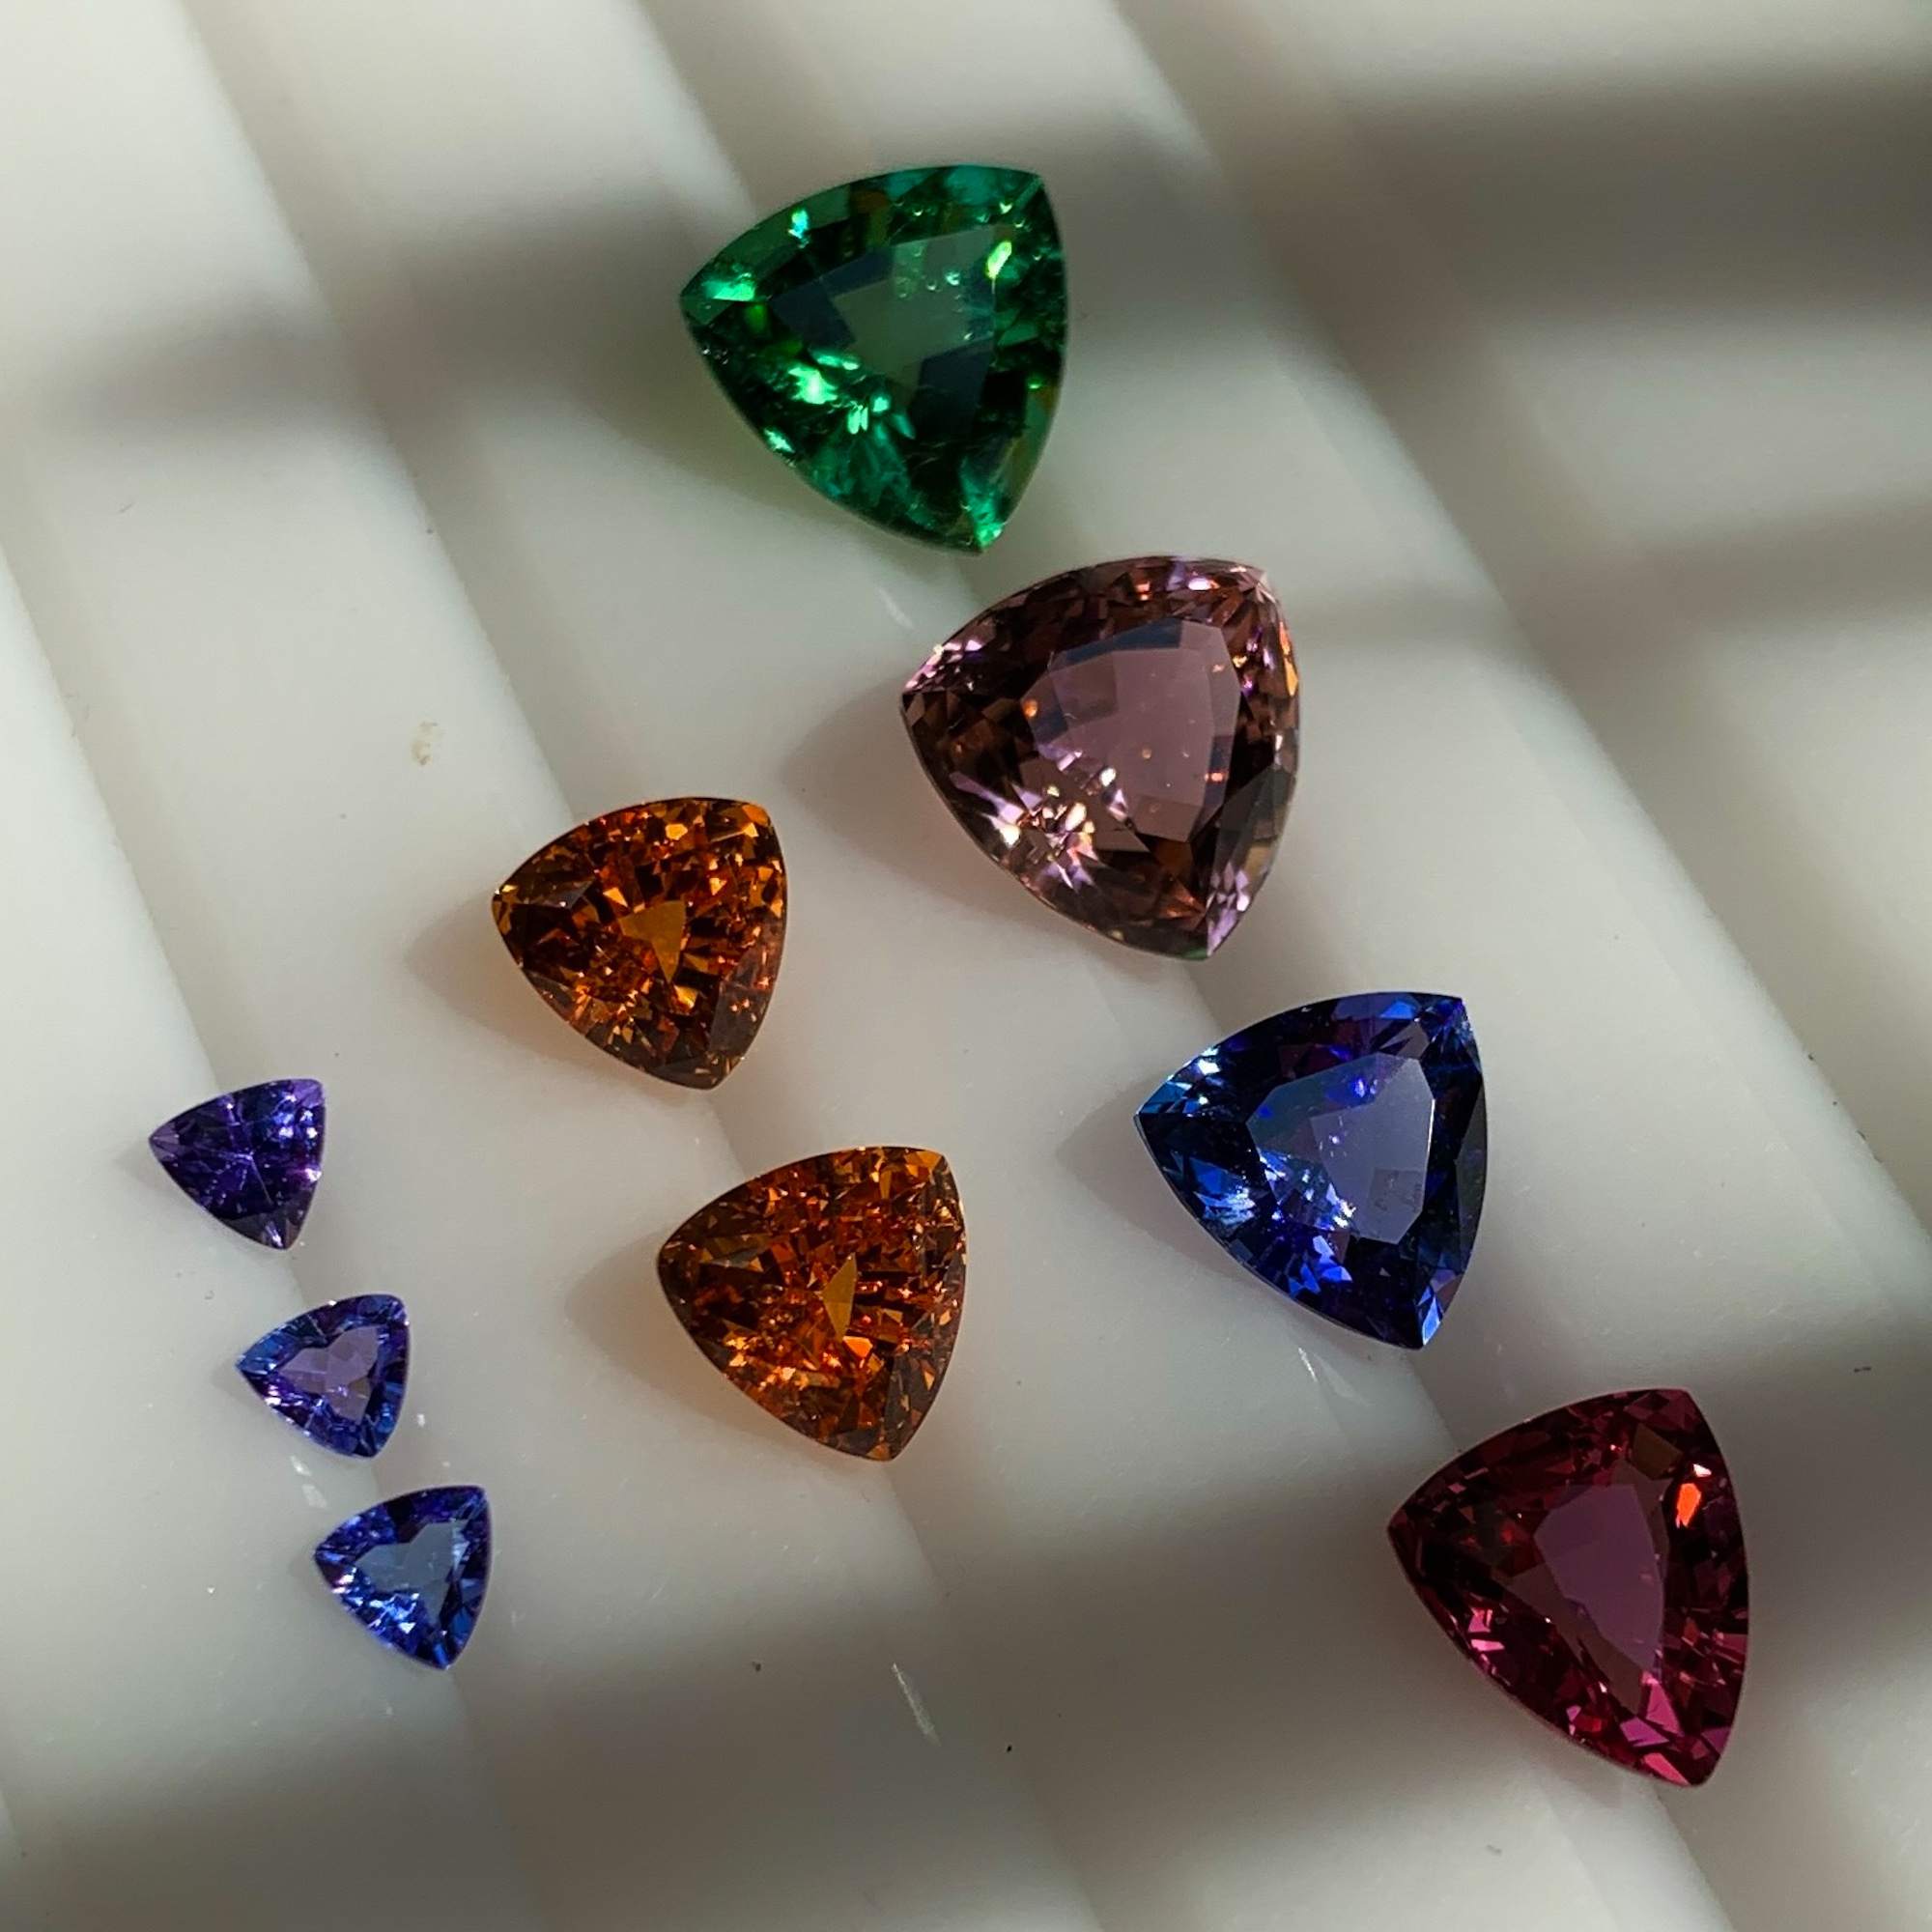 A Fine Jeweller’s Guide to Coloured Gemstones